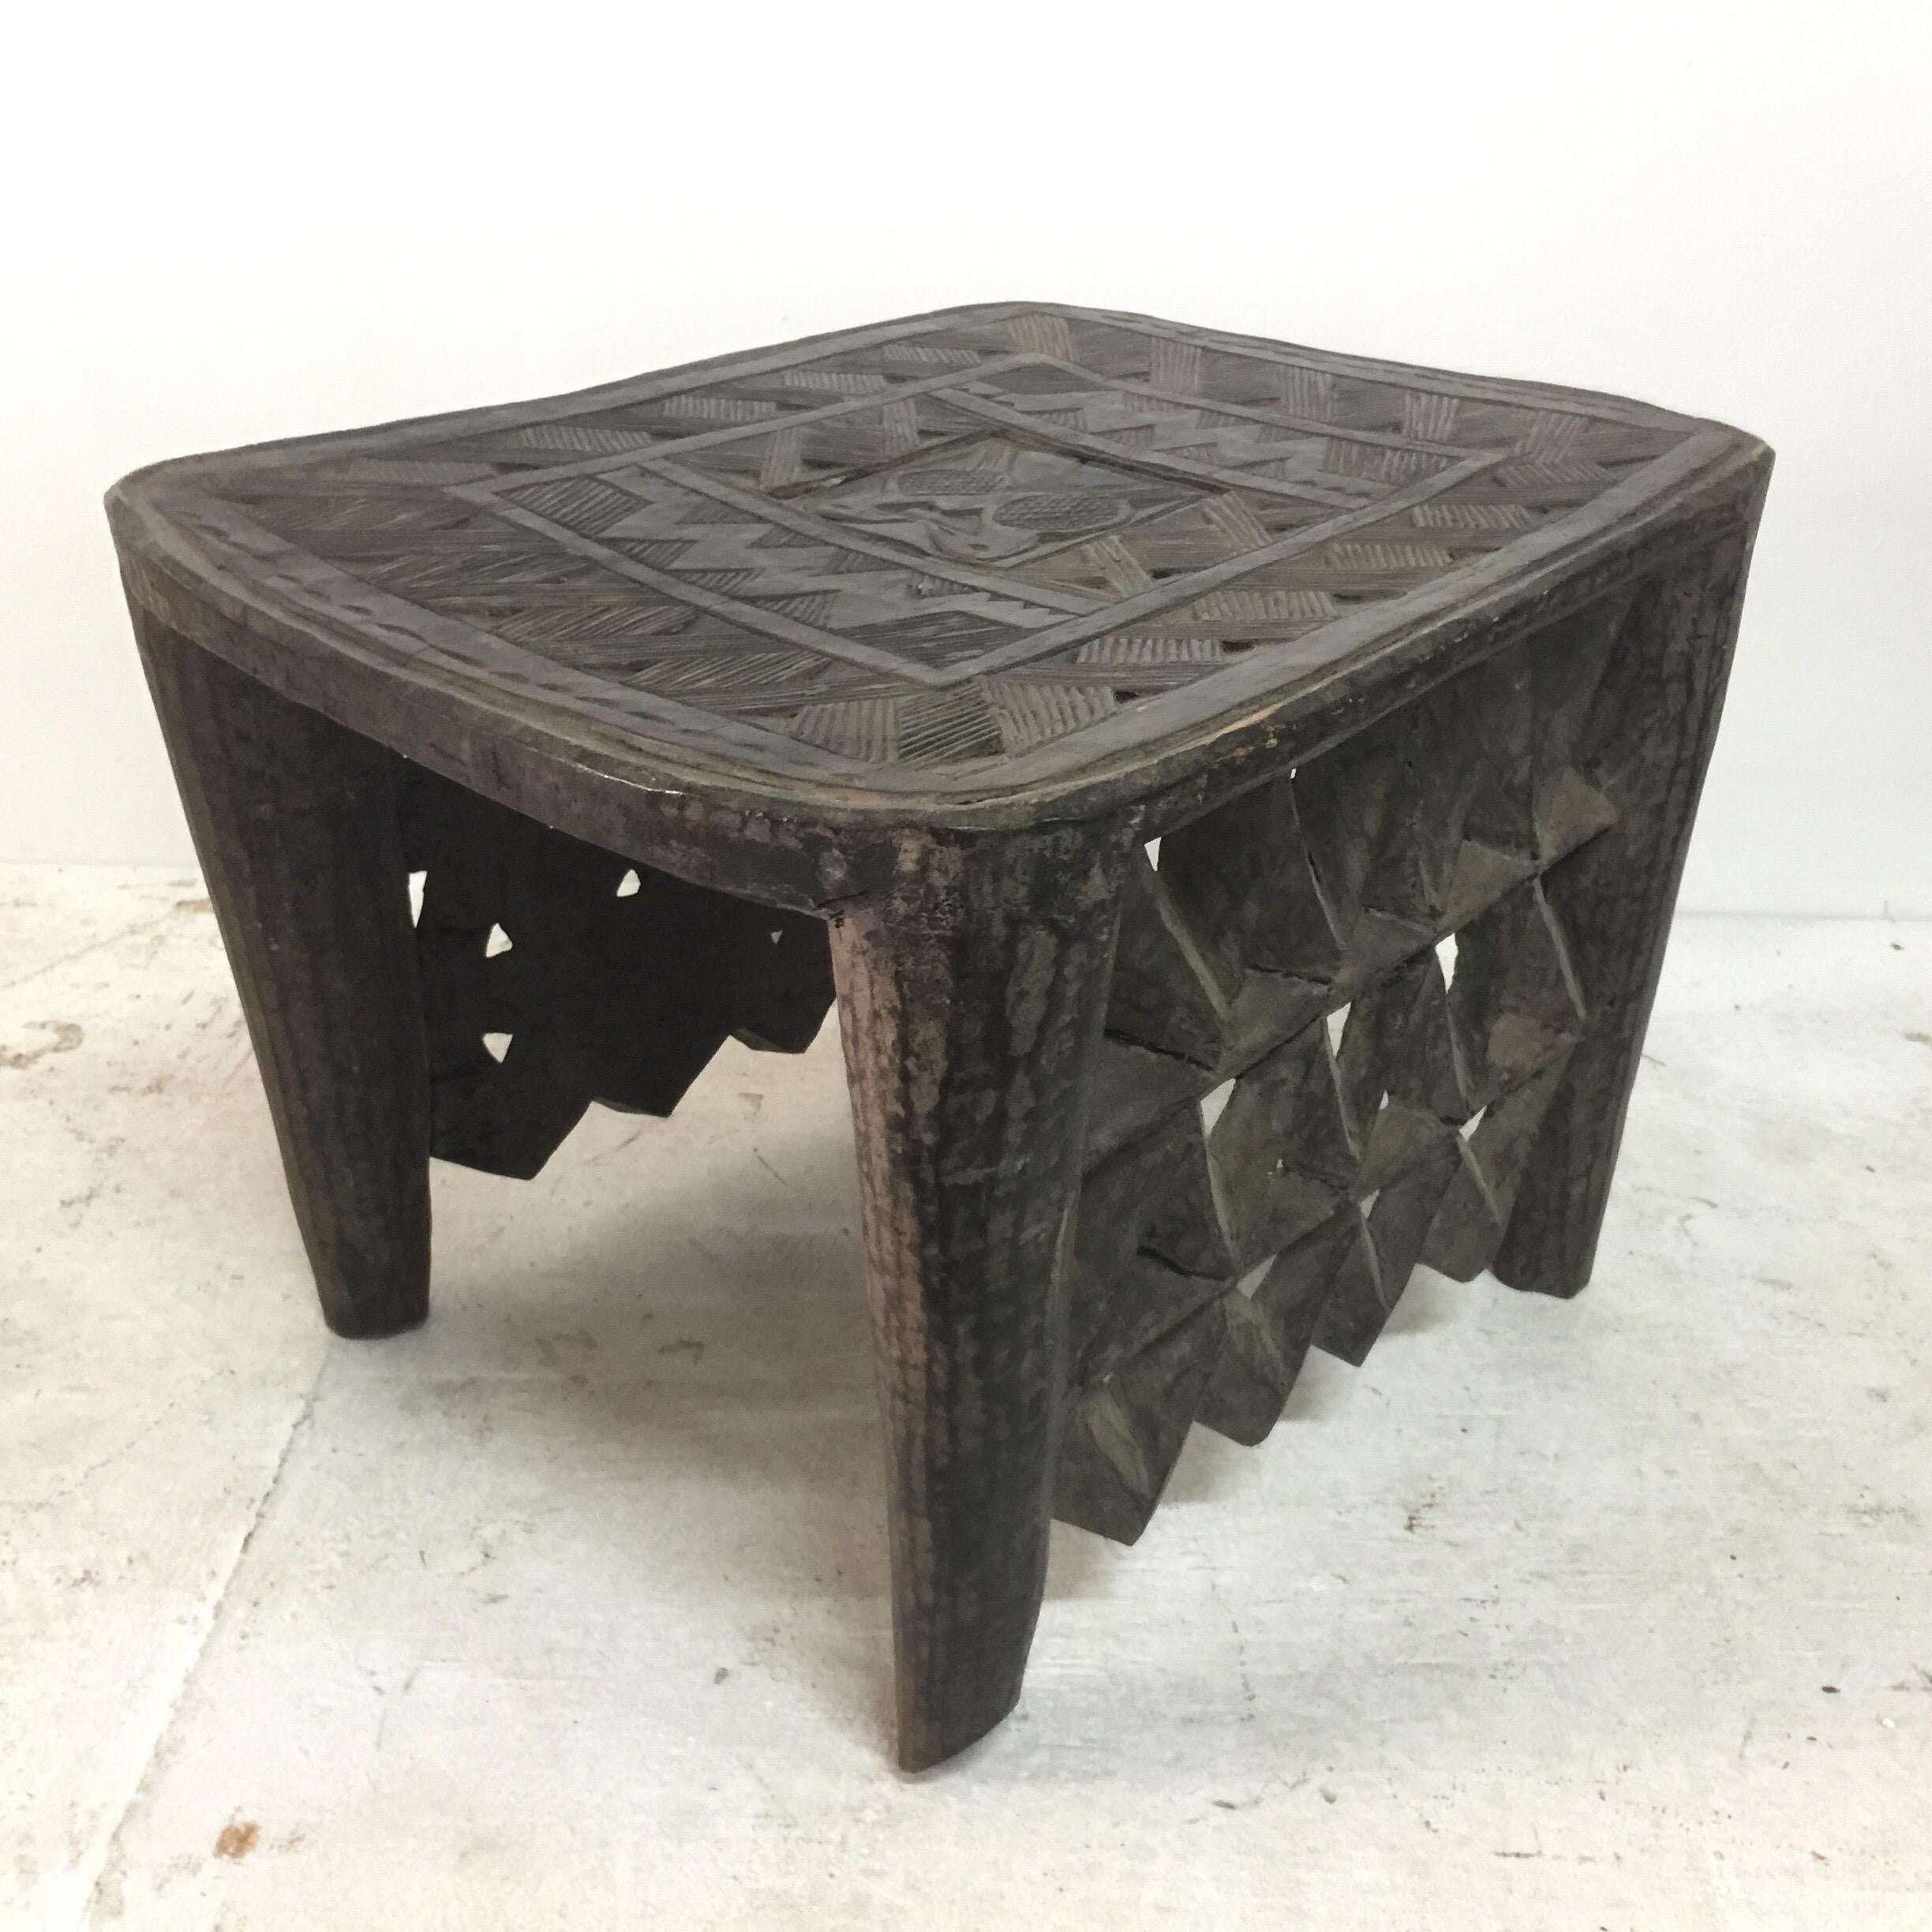 Tribal African Sidetable / Bench with Secret Compartment 4